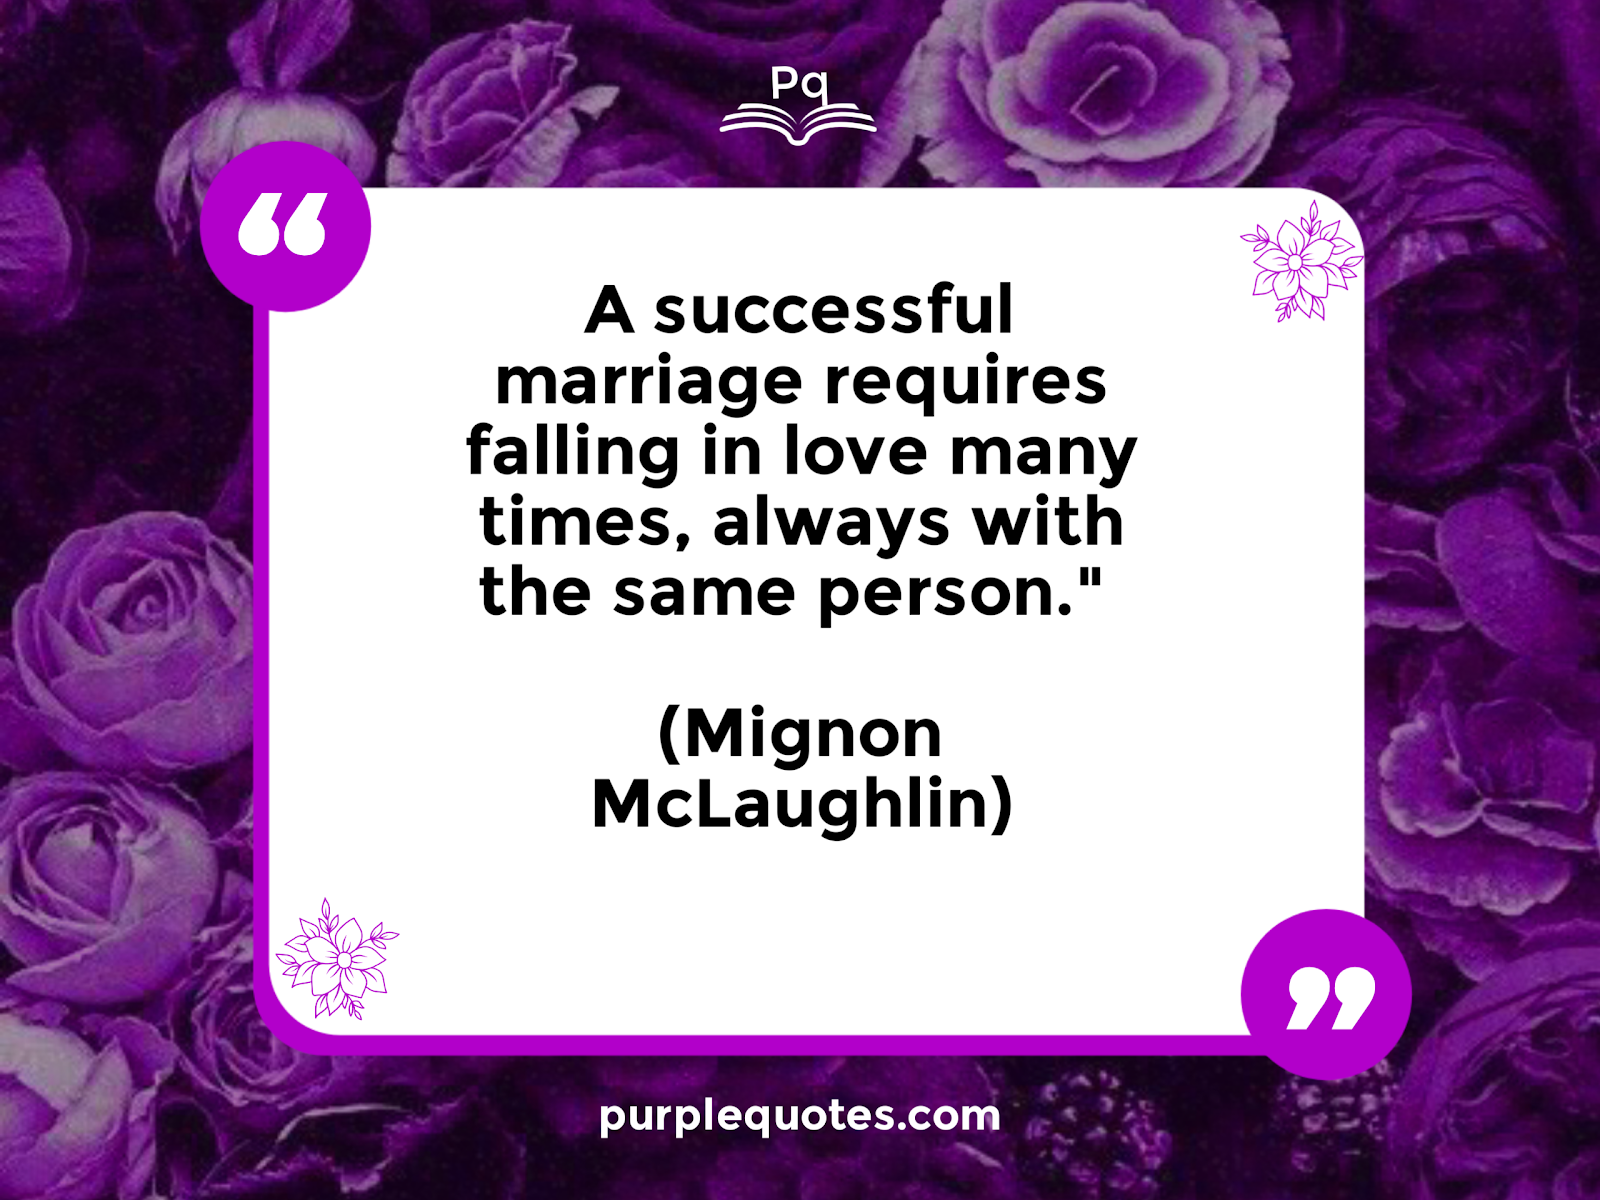 "A successful marriage requires falling in love many times, always with the same person." (Mignon McLaughlin)